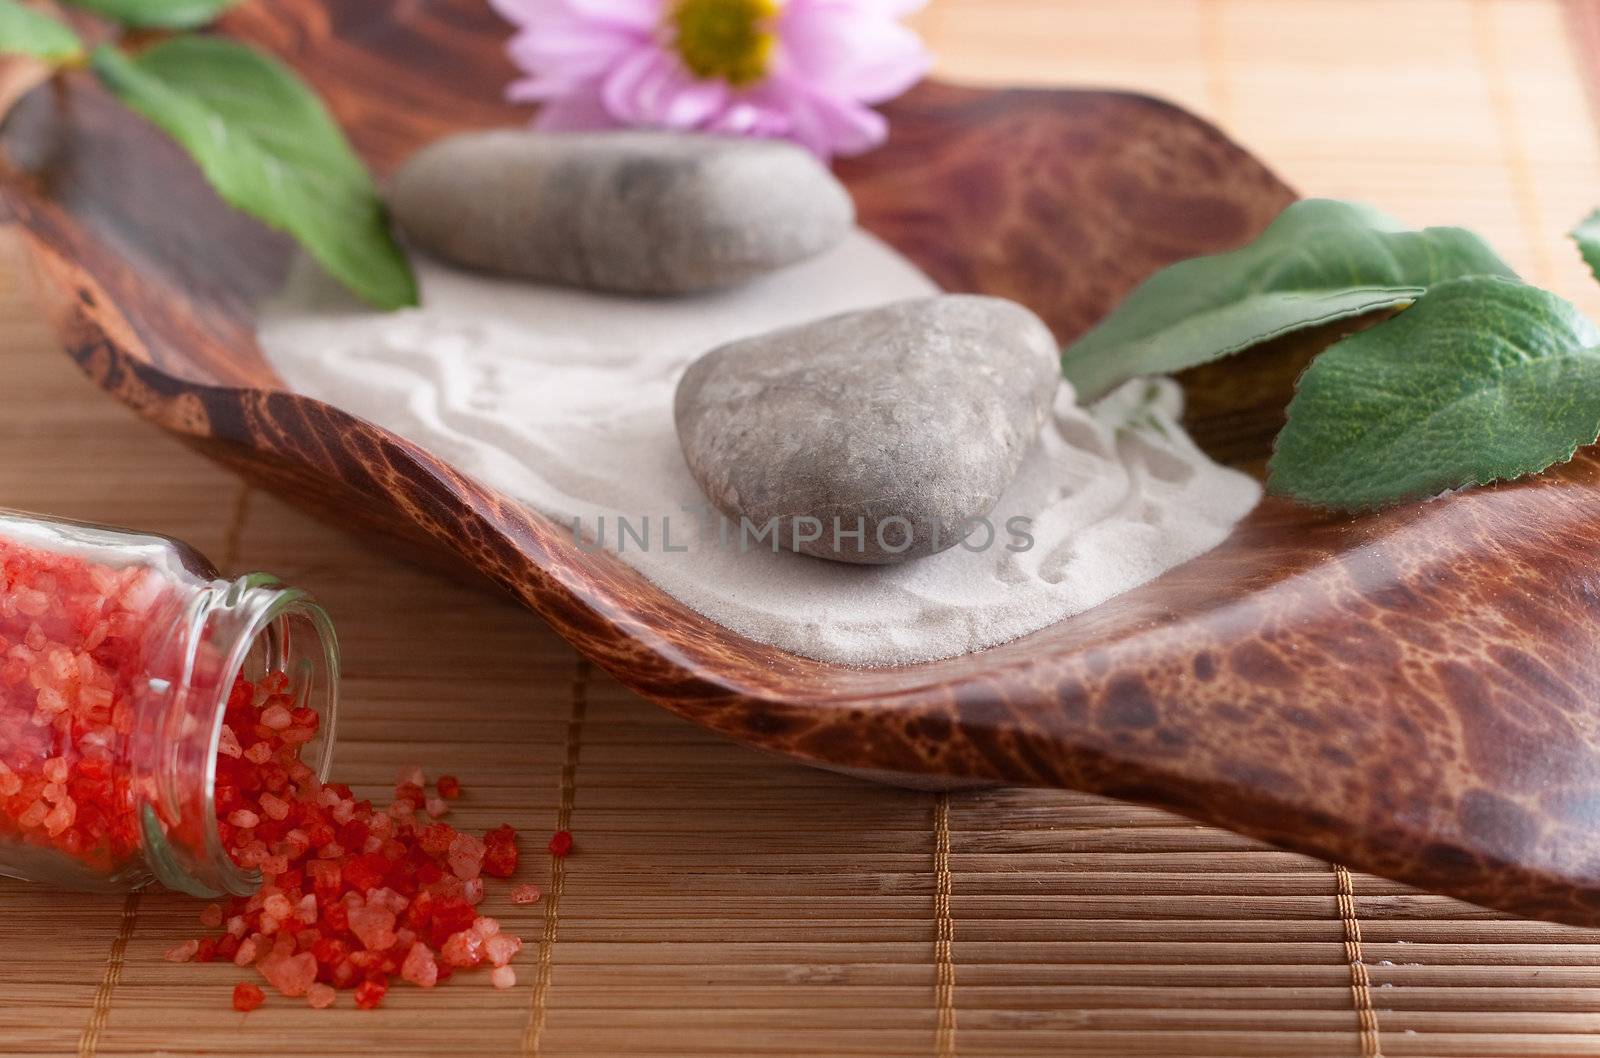 Massage stones on sand in a bowl, a purple flower and red bath salt